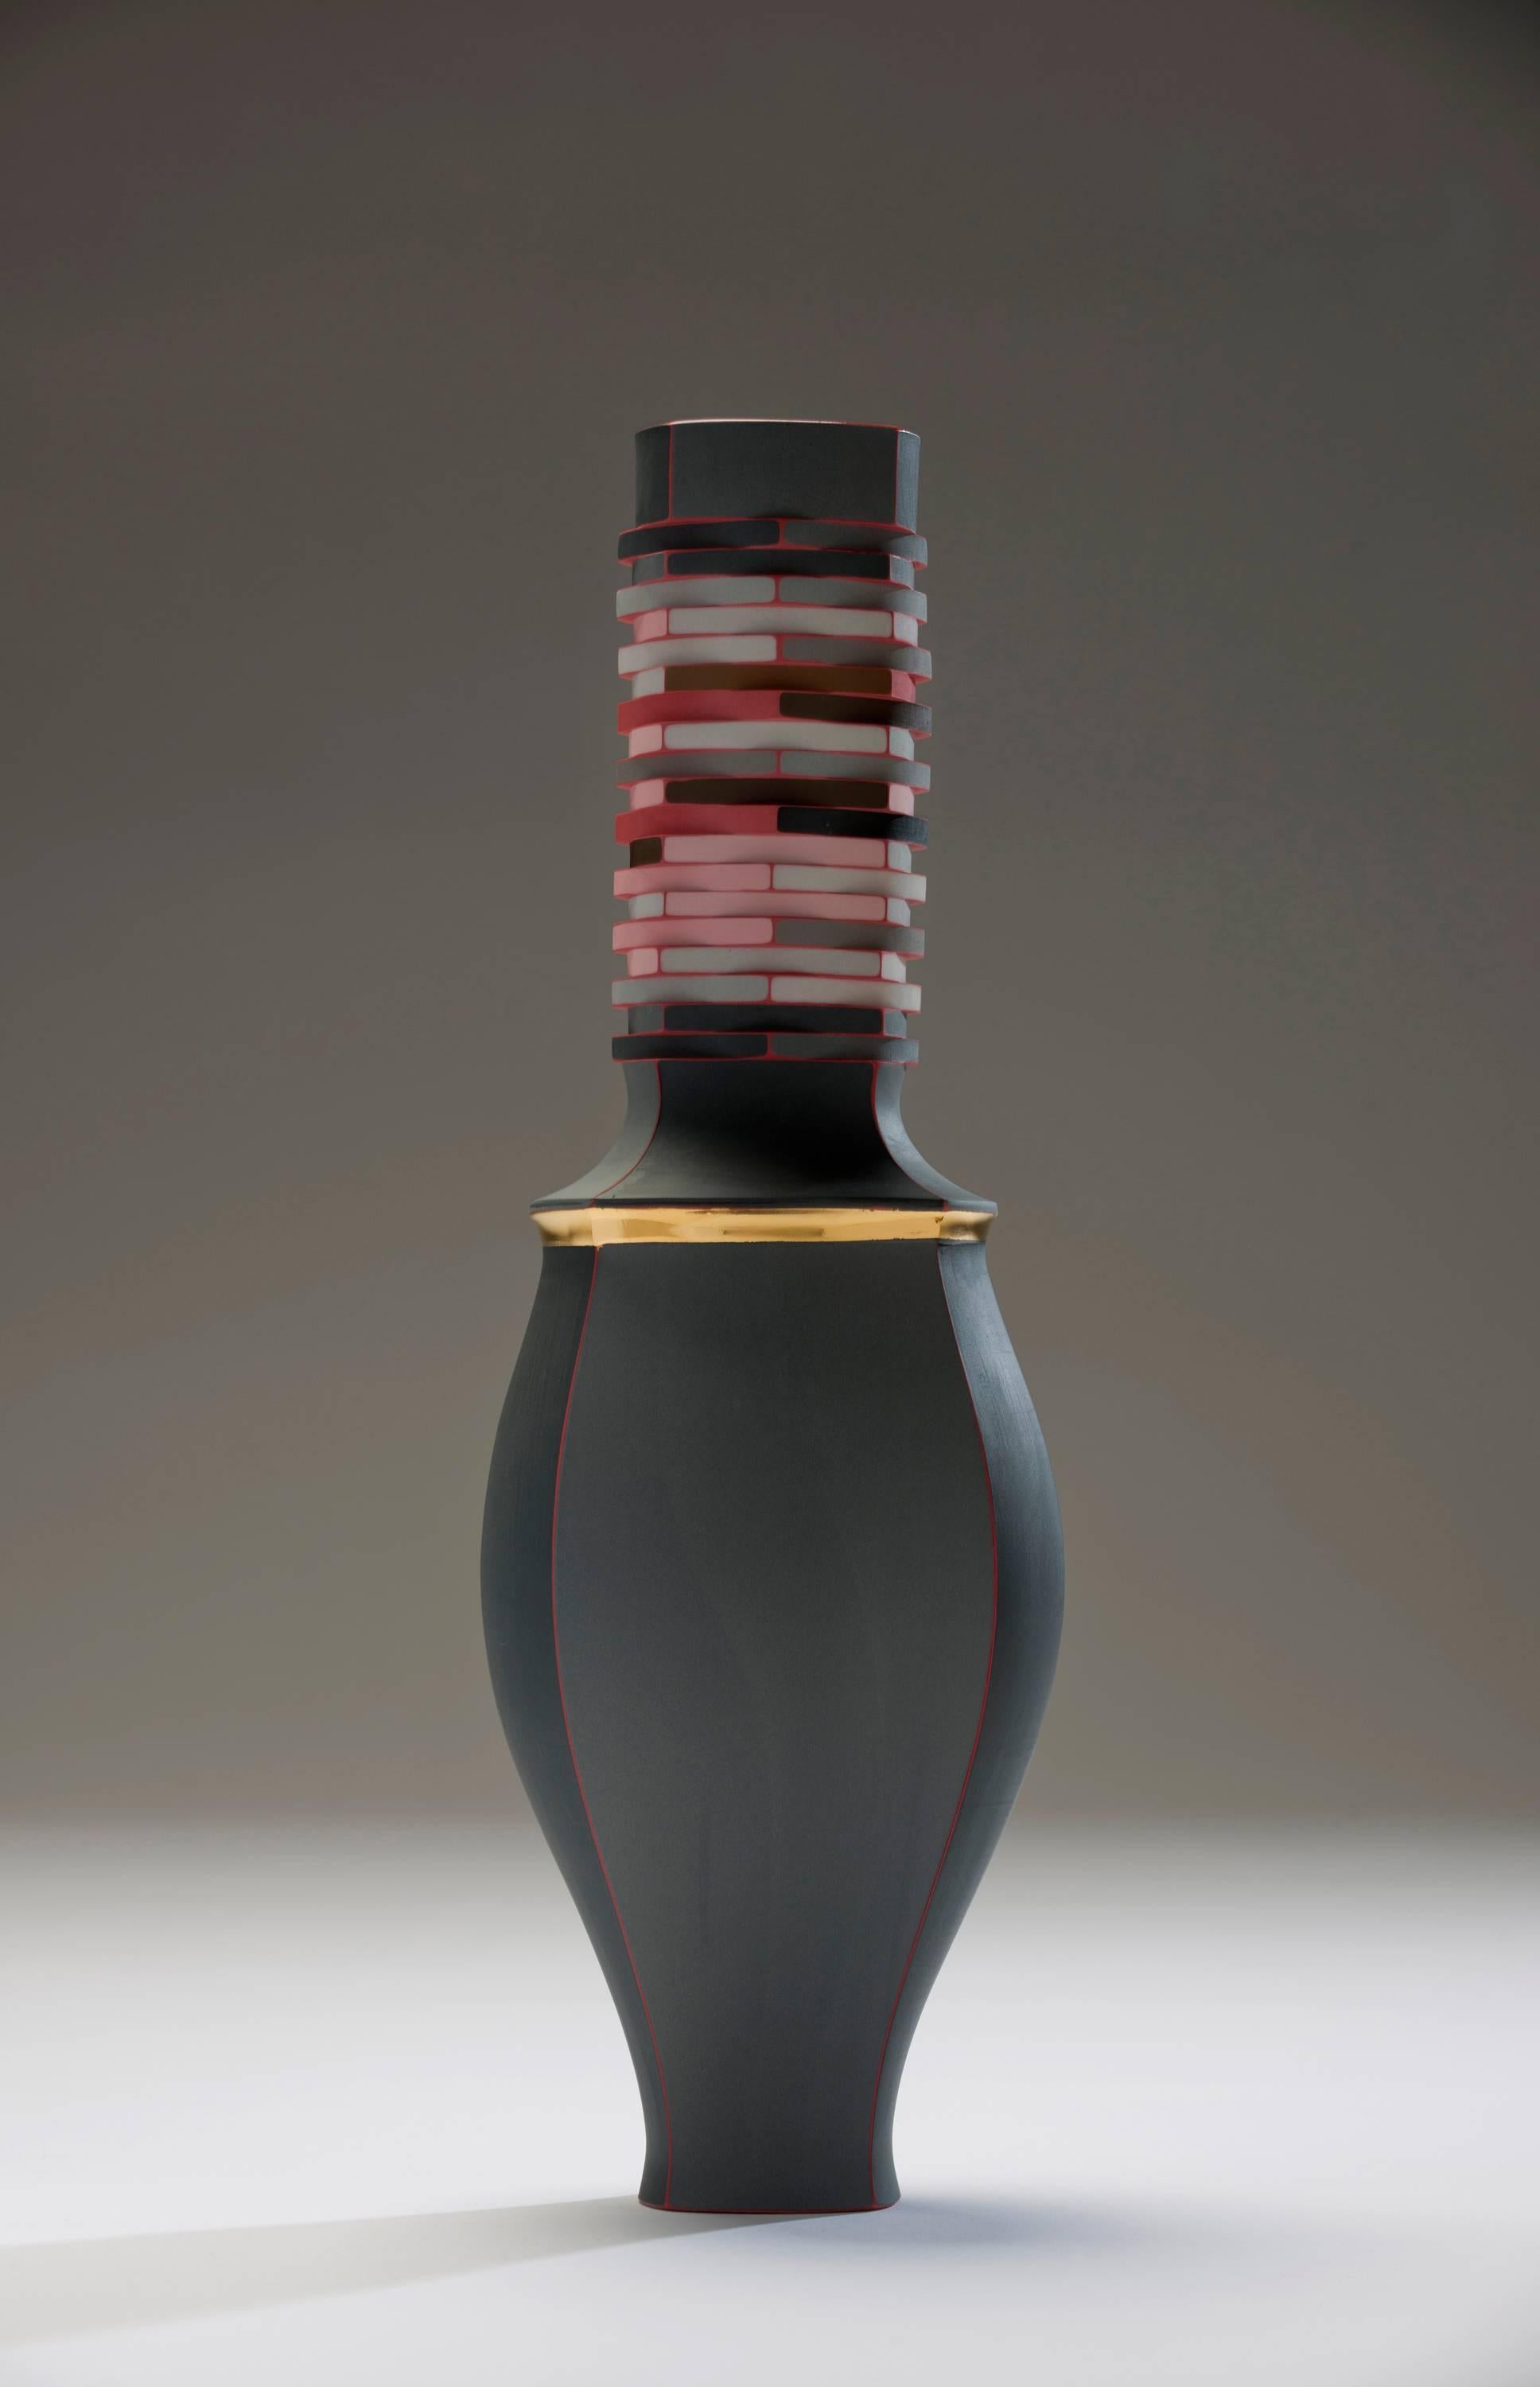 Peter Pincus
Red Vase, 2016
Colored porcelain
16 x 5 x 5 in

Born in Rochester, NY, Peter Pincus is a ceramic artist and instructor. He joined the School for American Crafts as Visiting Assistant Professor in Ceramics in Fall 2014. A recipient of